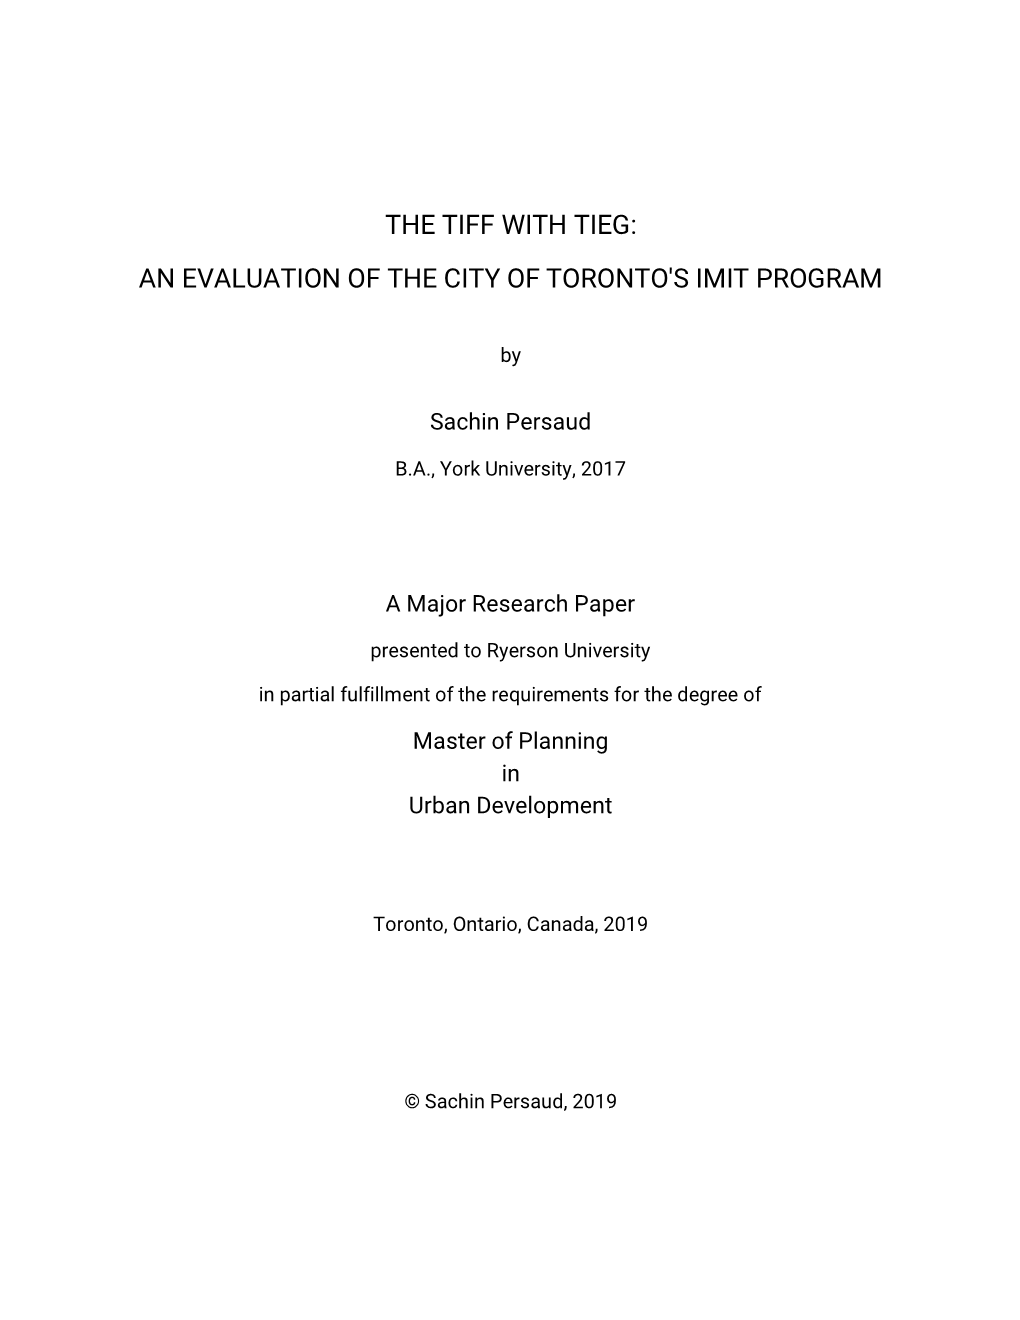 An Evaluation of the City of Toronto's Imit Program